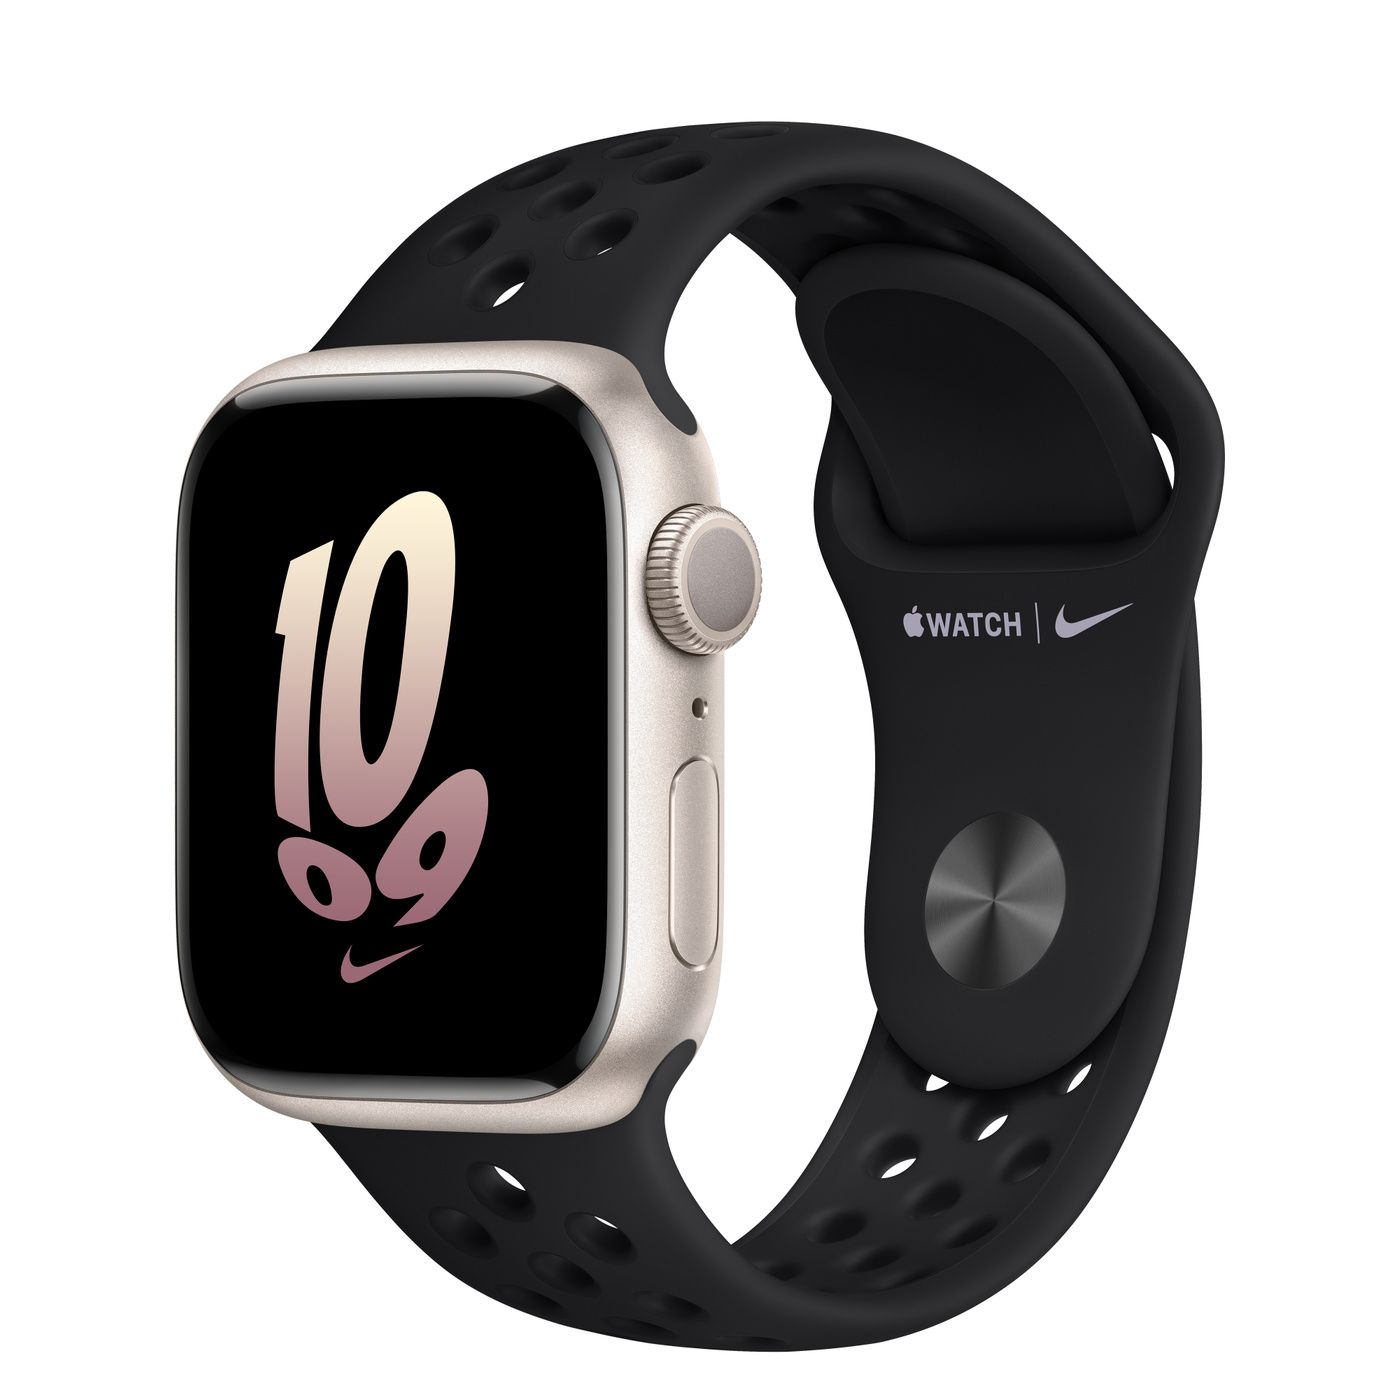 Starlight Aluminum Case with Nike Sport Band | Apple (US)